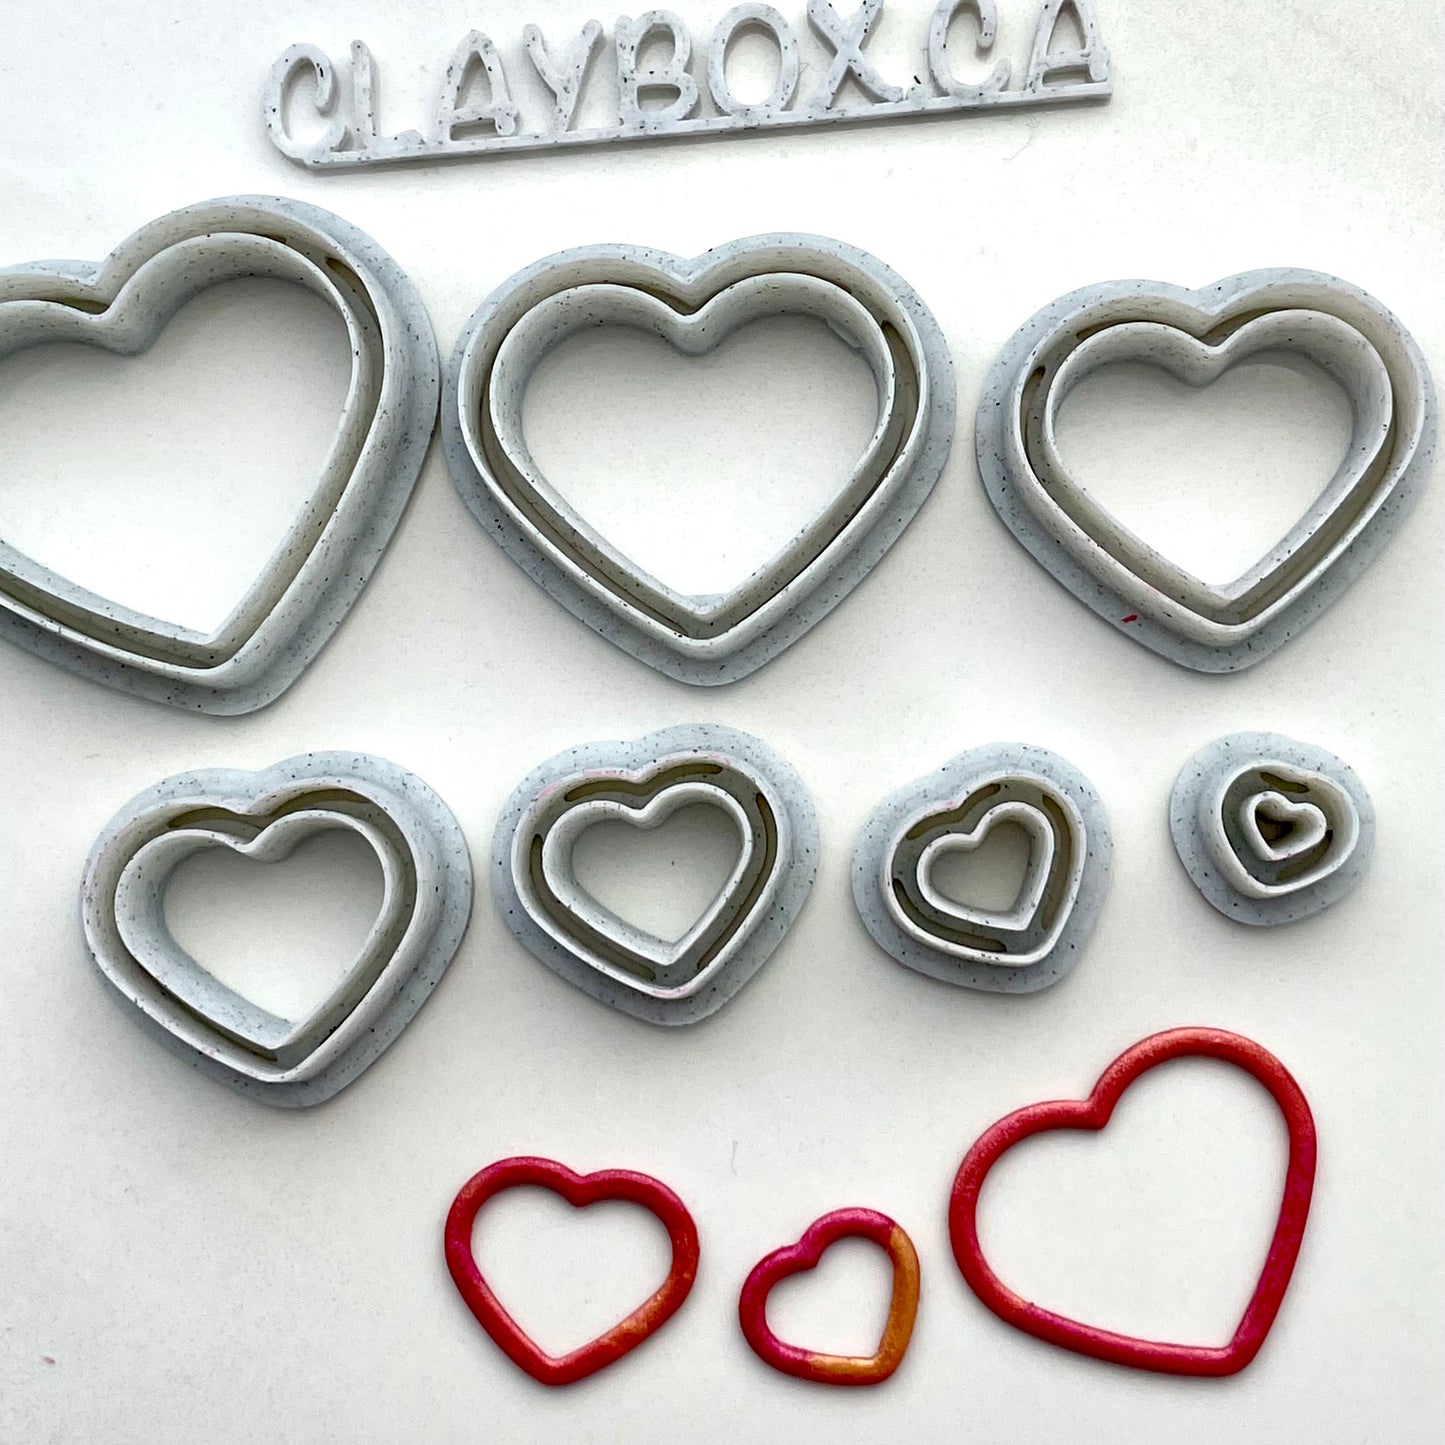 Skinny hearts donut set - made for use with polymer clay